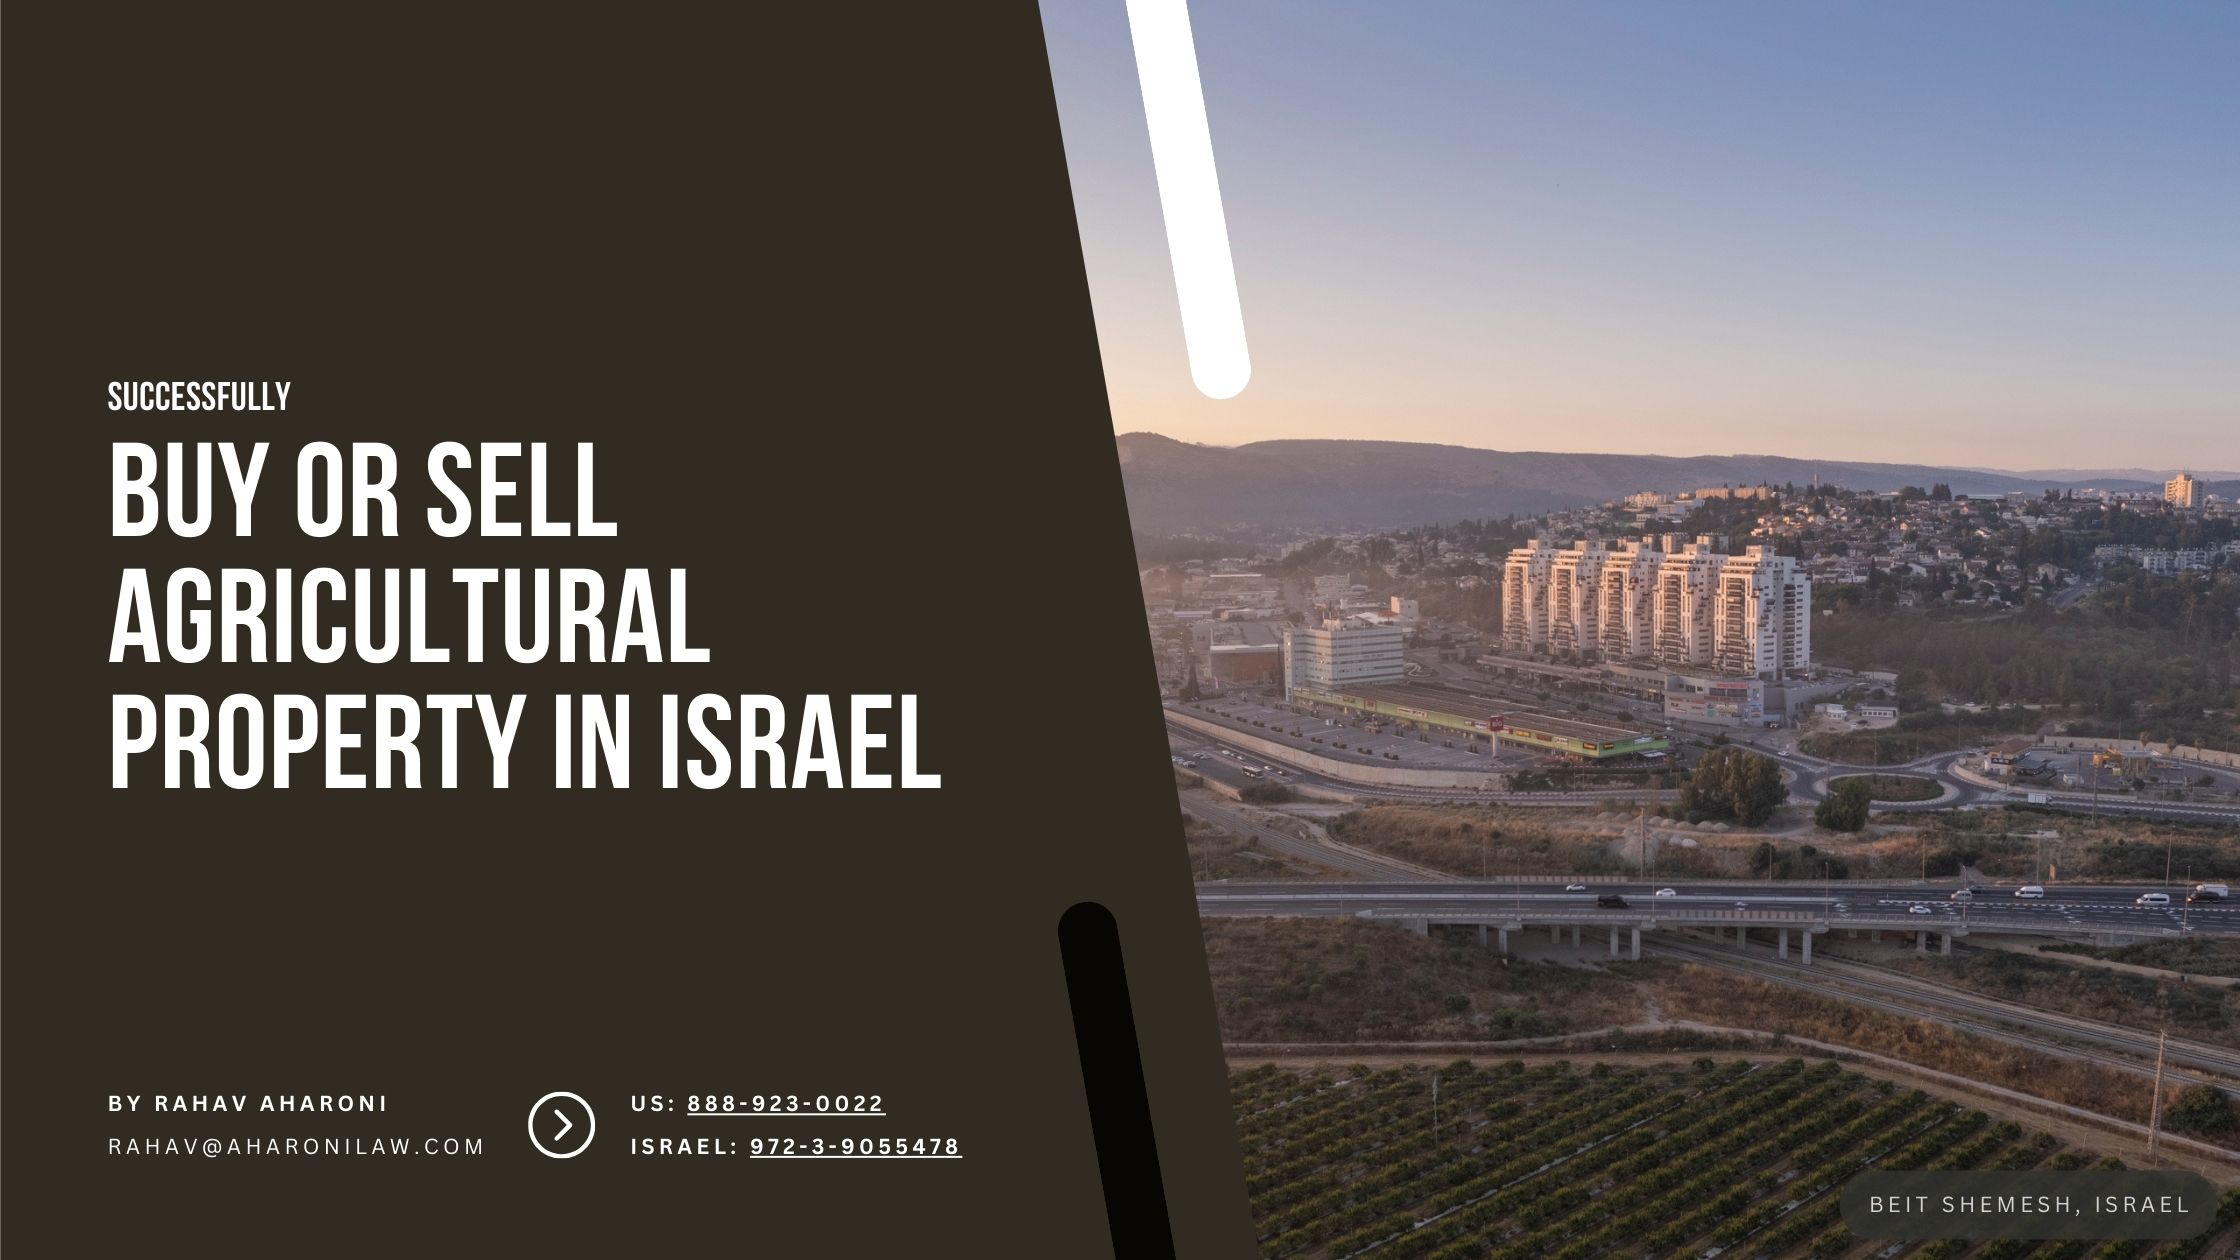 How to Successfully Buy or Sell Agricultural Property in Israel?